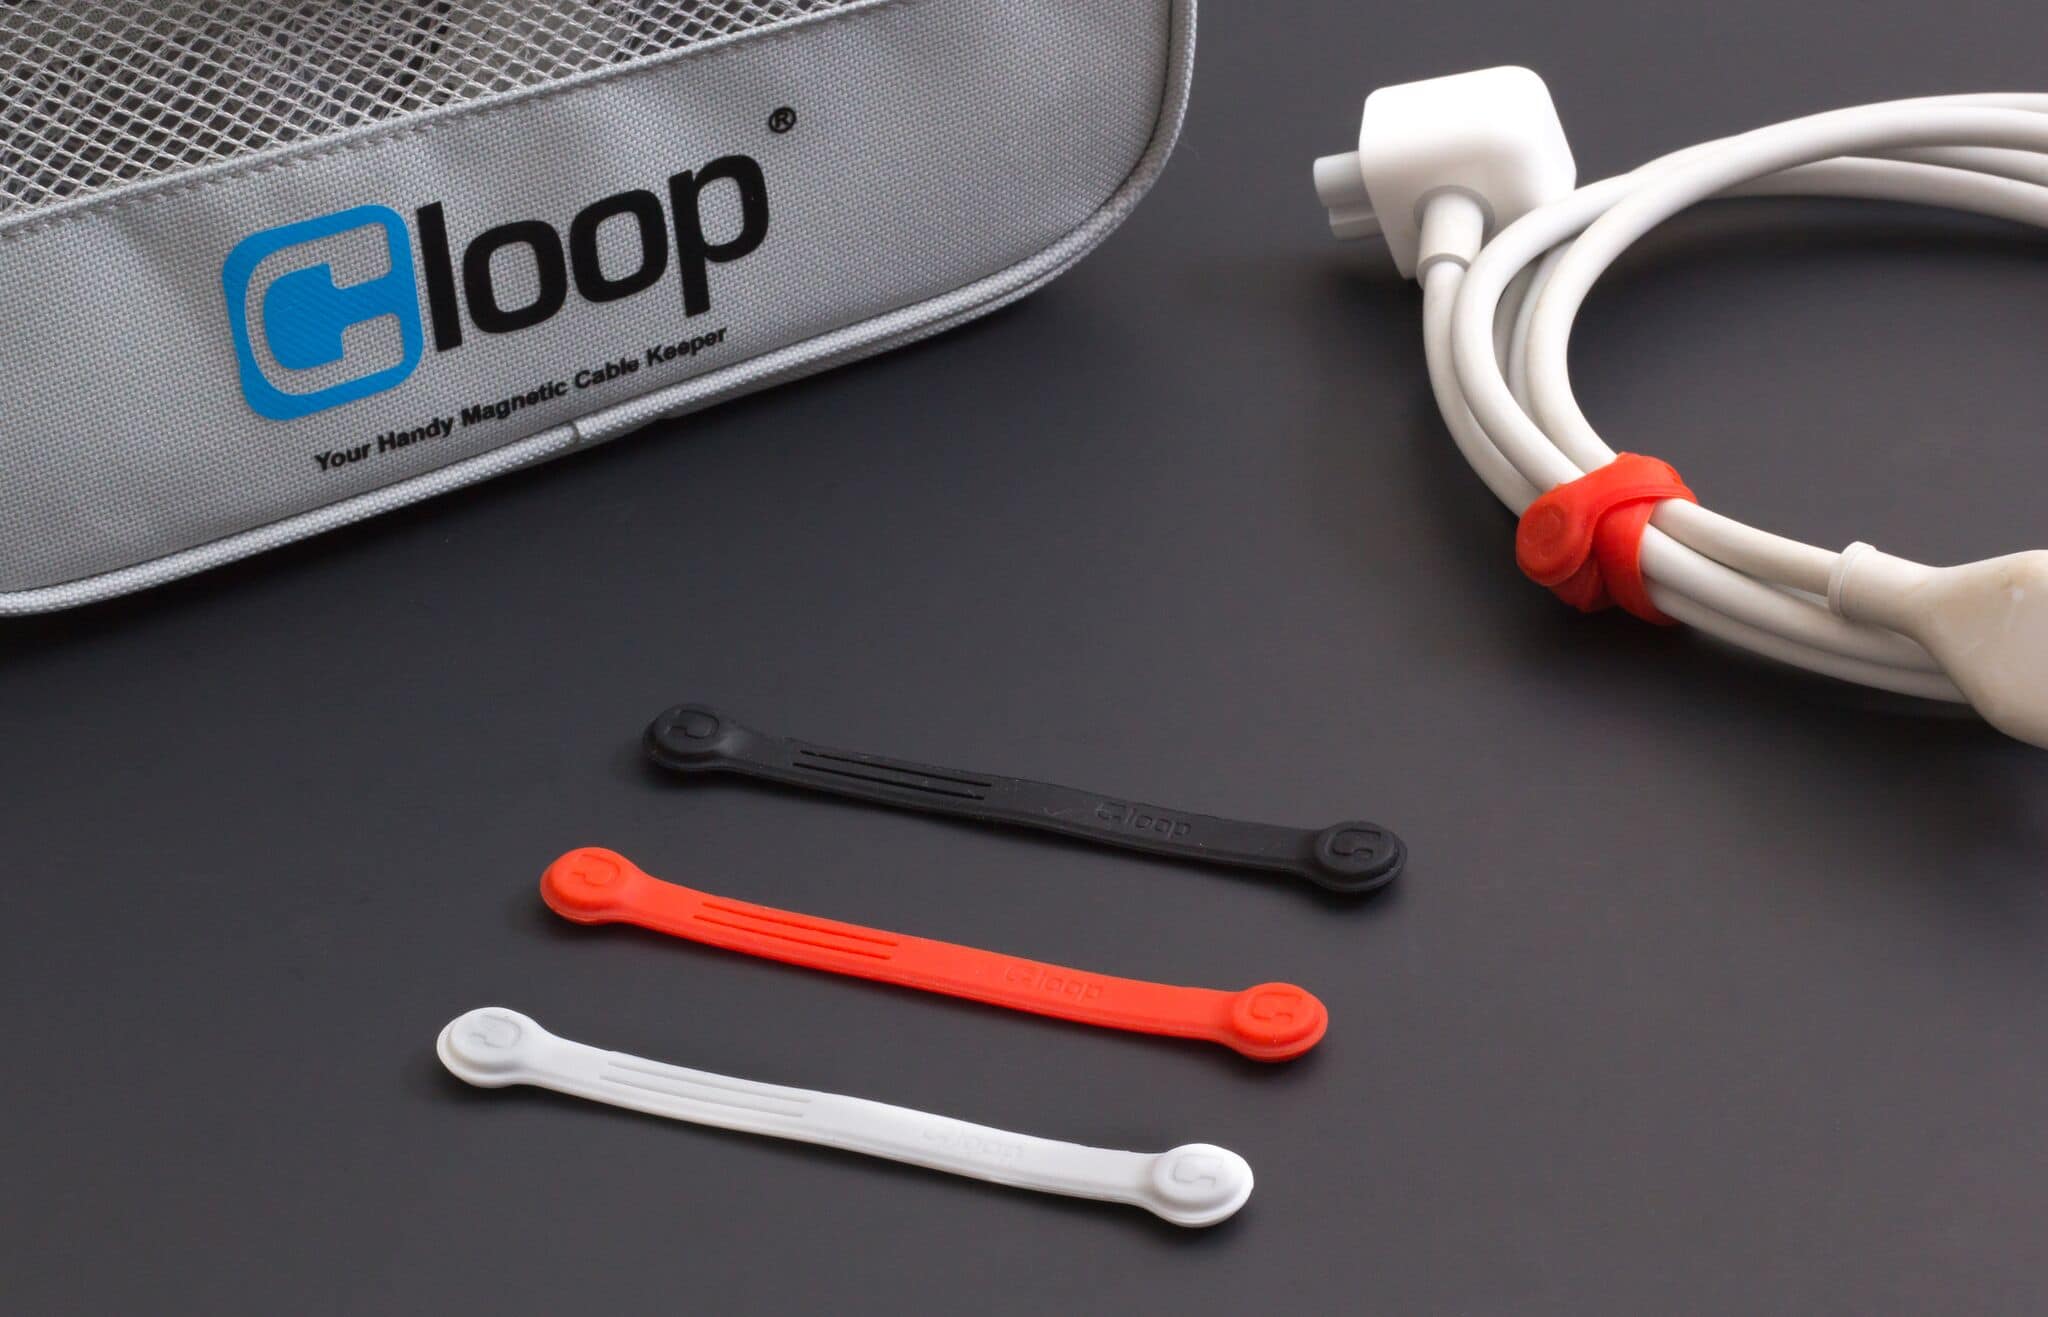 Cloop Magnetic Cable Organizer